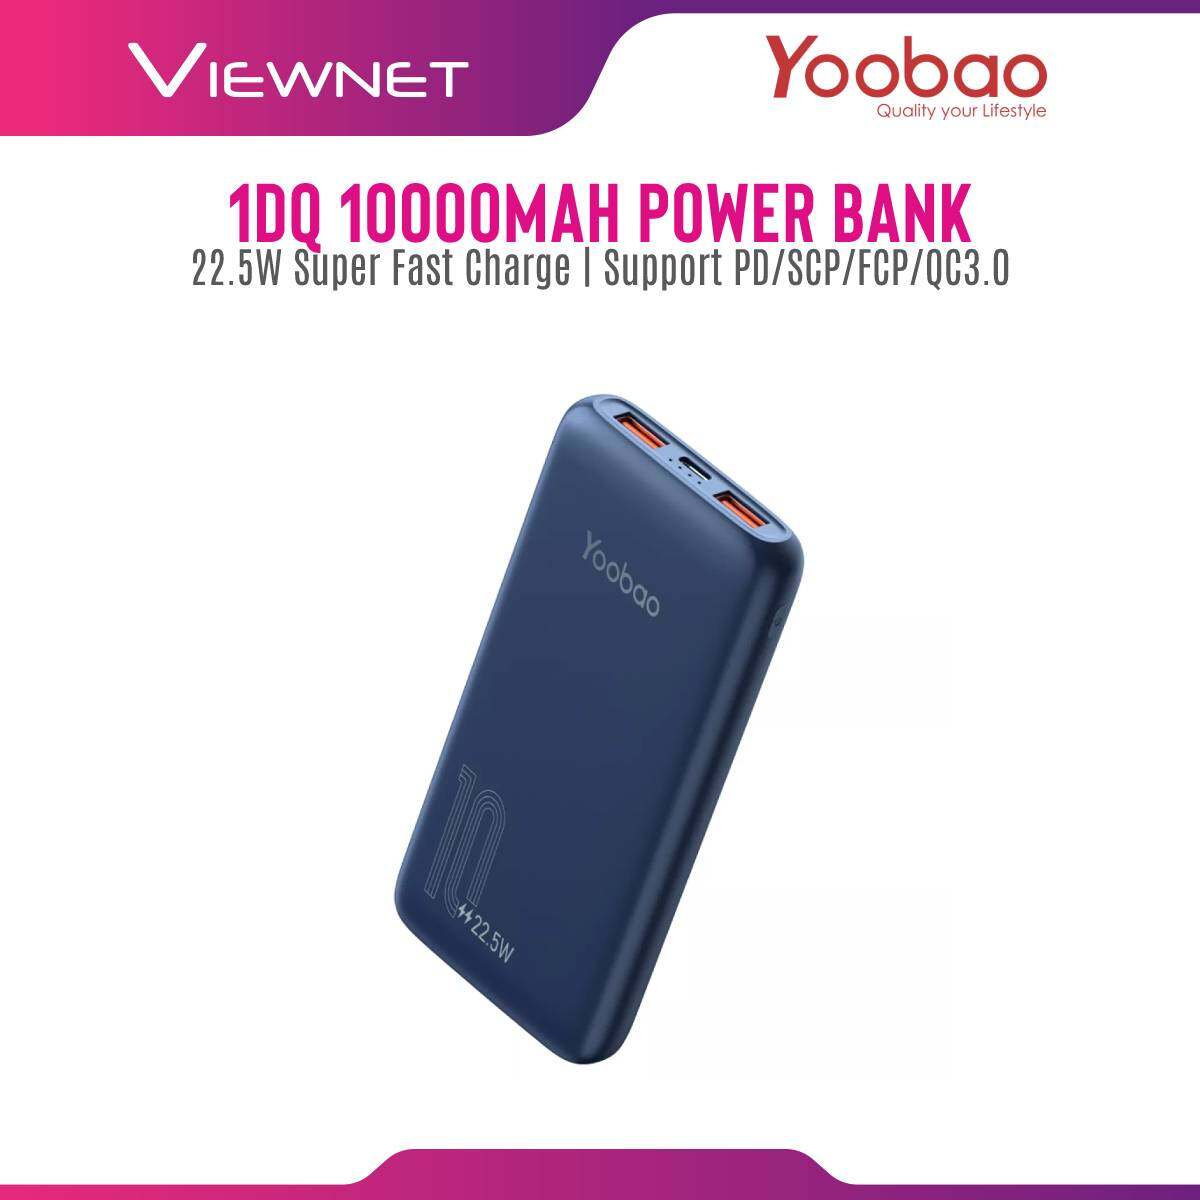 Yoobao D10Q 10000mAh 22.5W Super Fast Charge Slim Power Bank Support PD/SCP/FCP/QC3.0 with Dual Output